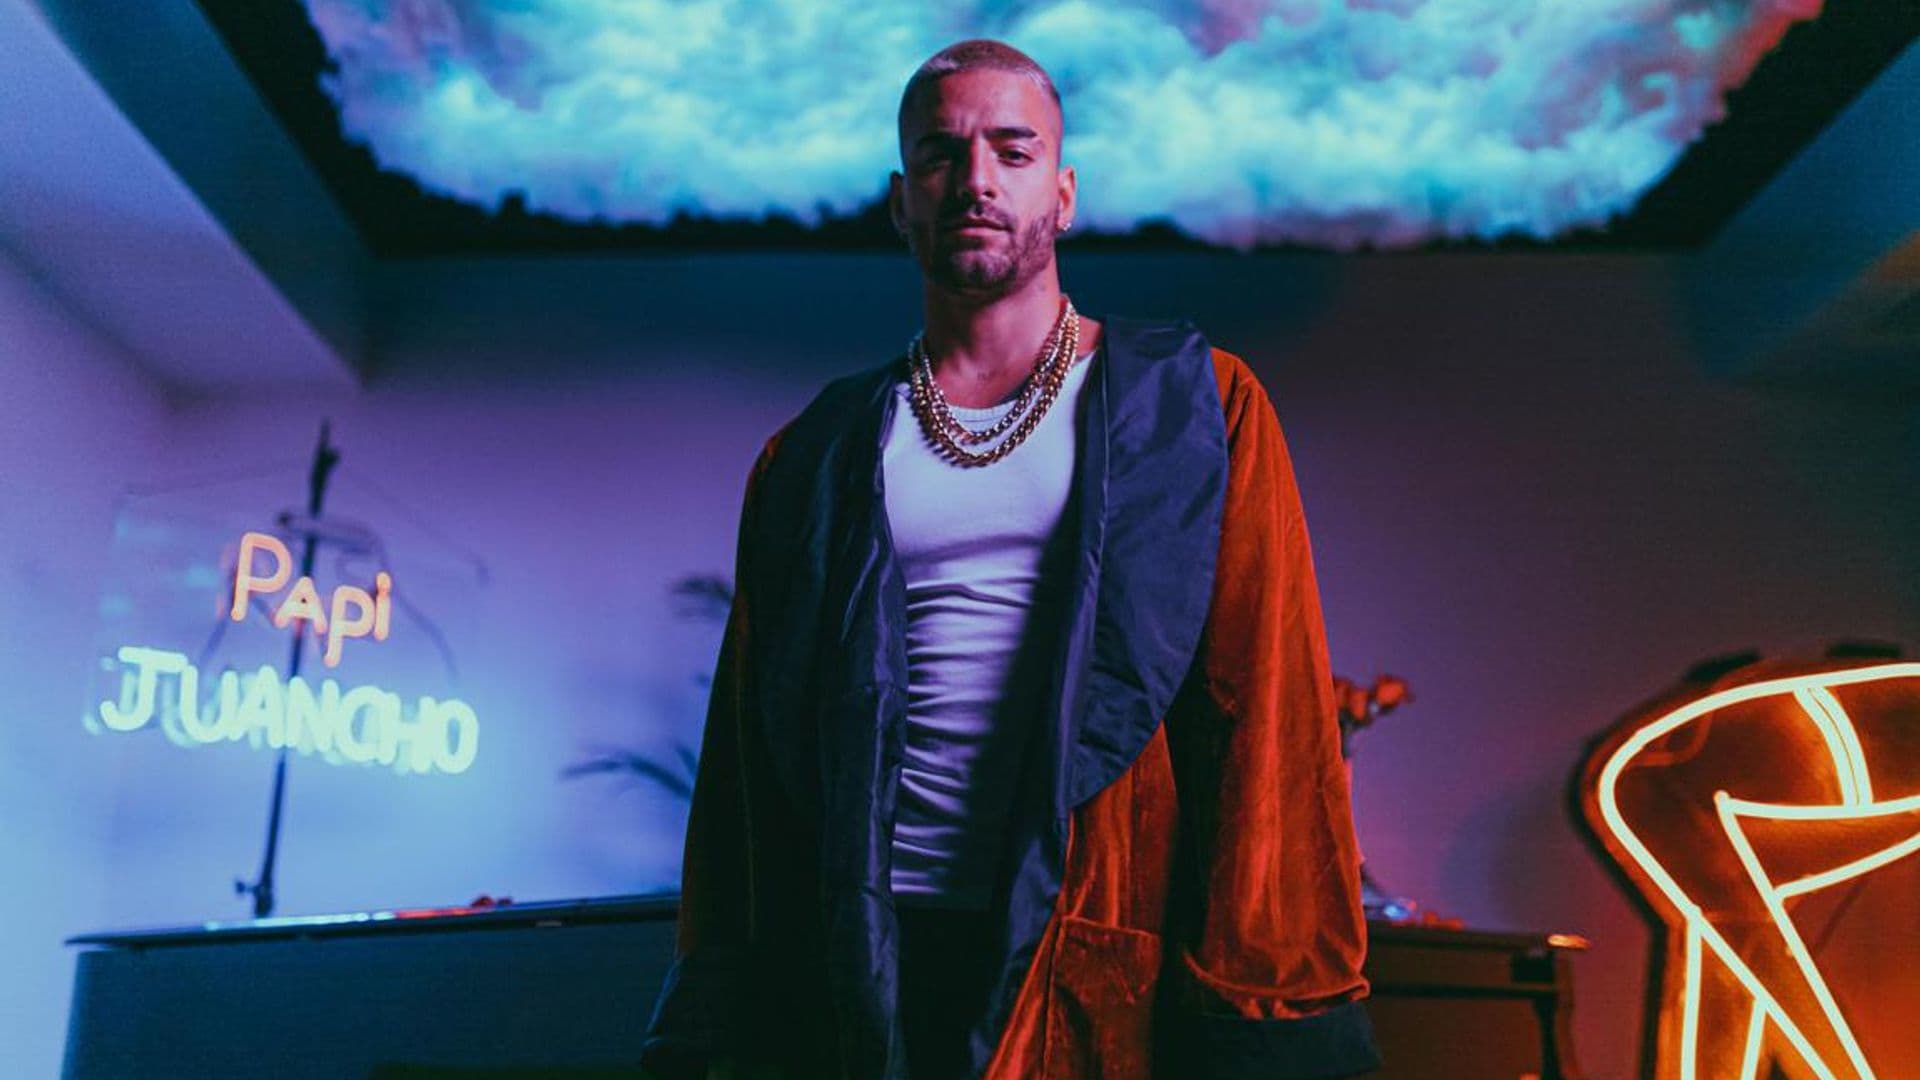 Maluma is reverting to his 'dirty boy' side with new album 'Papi Juancho'